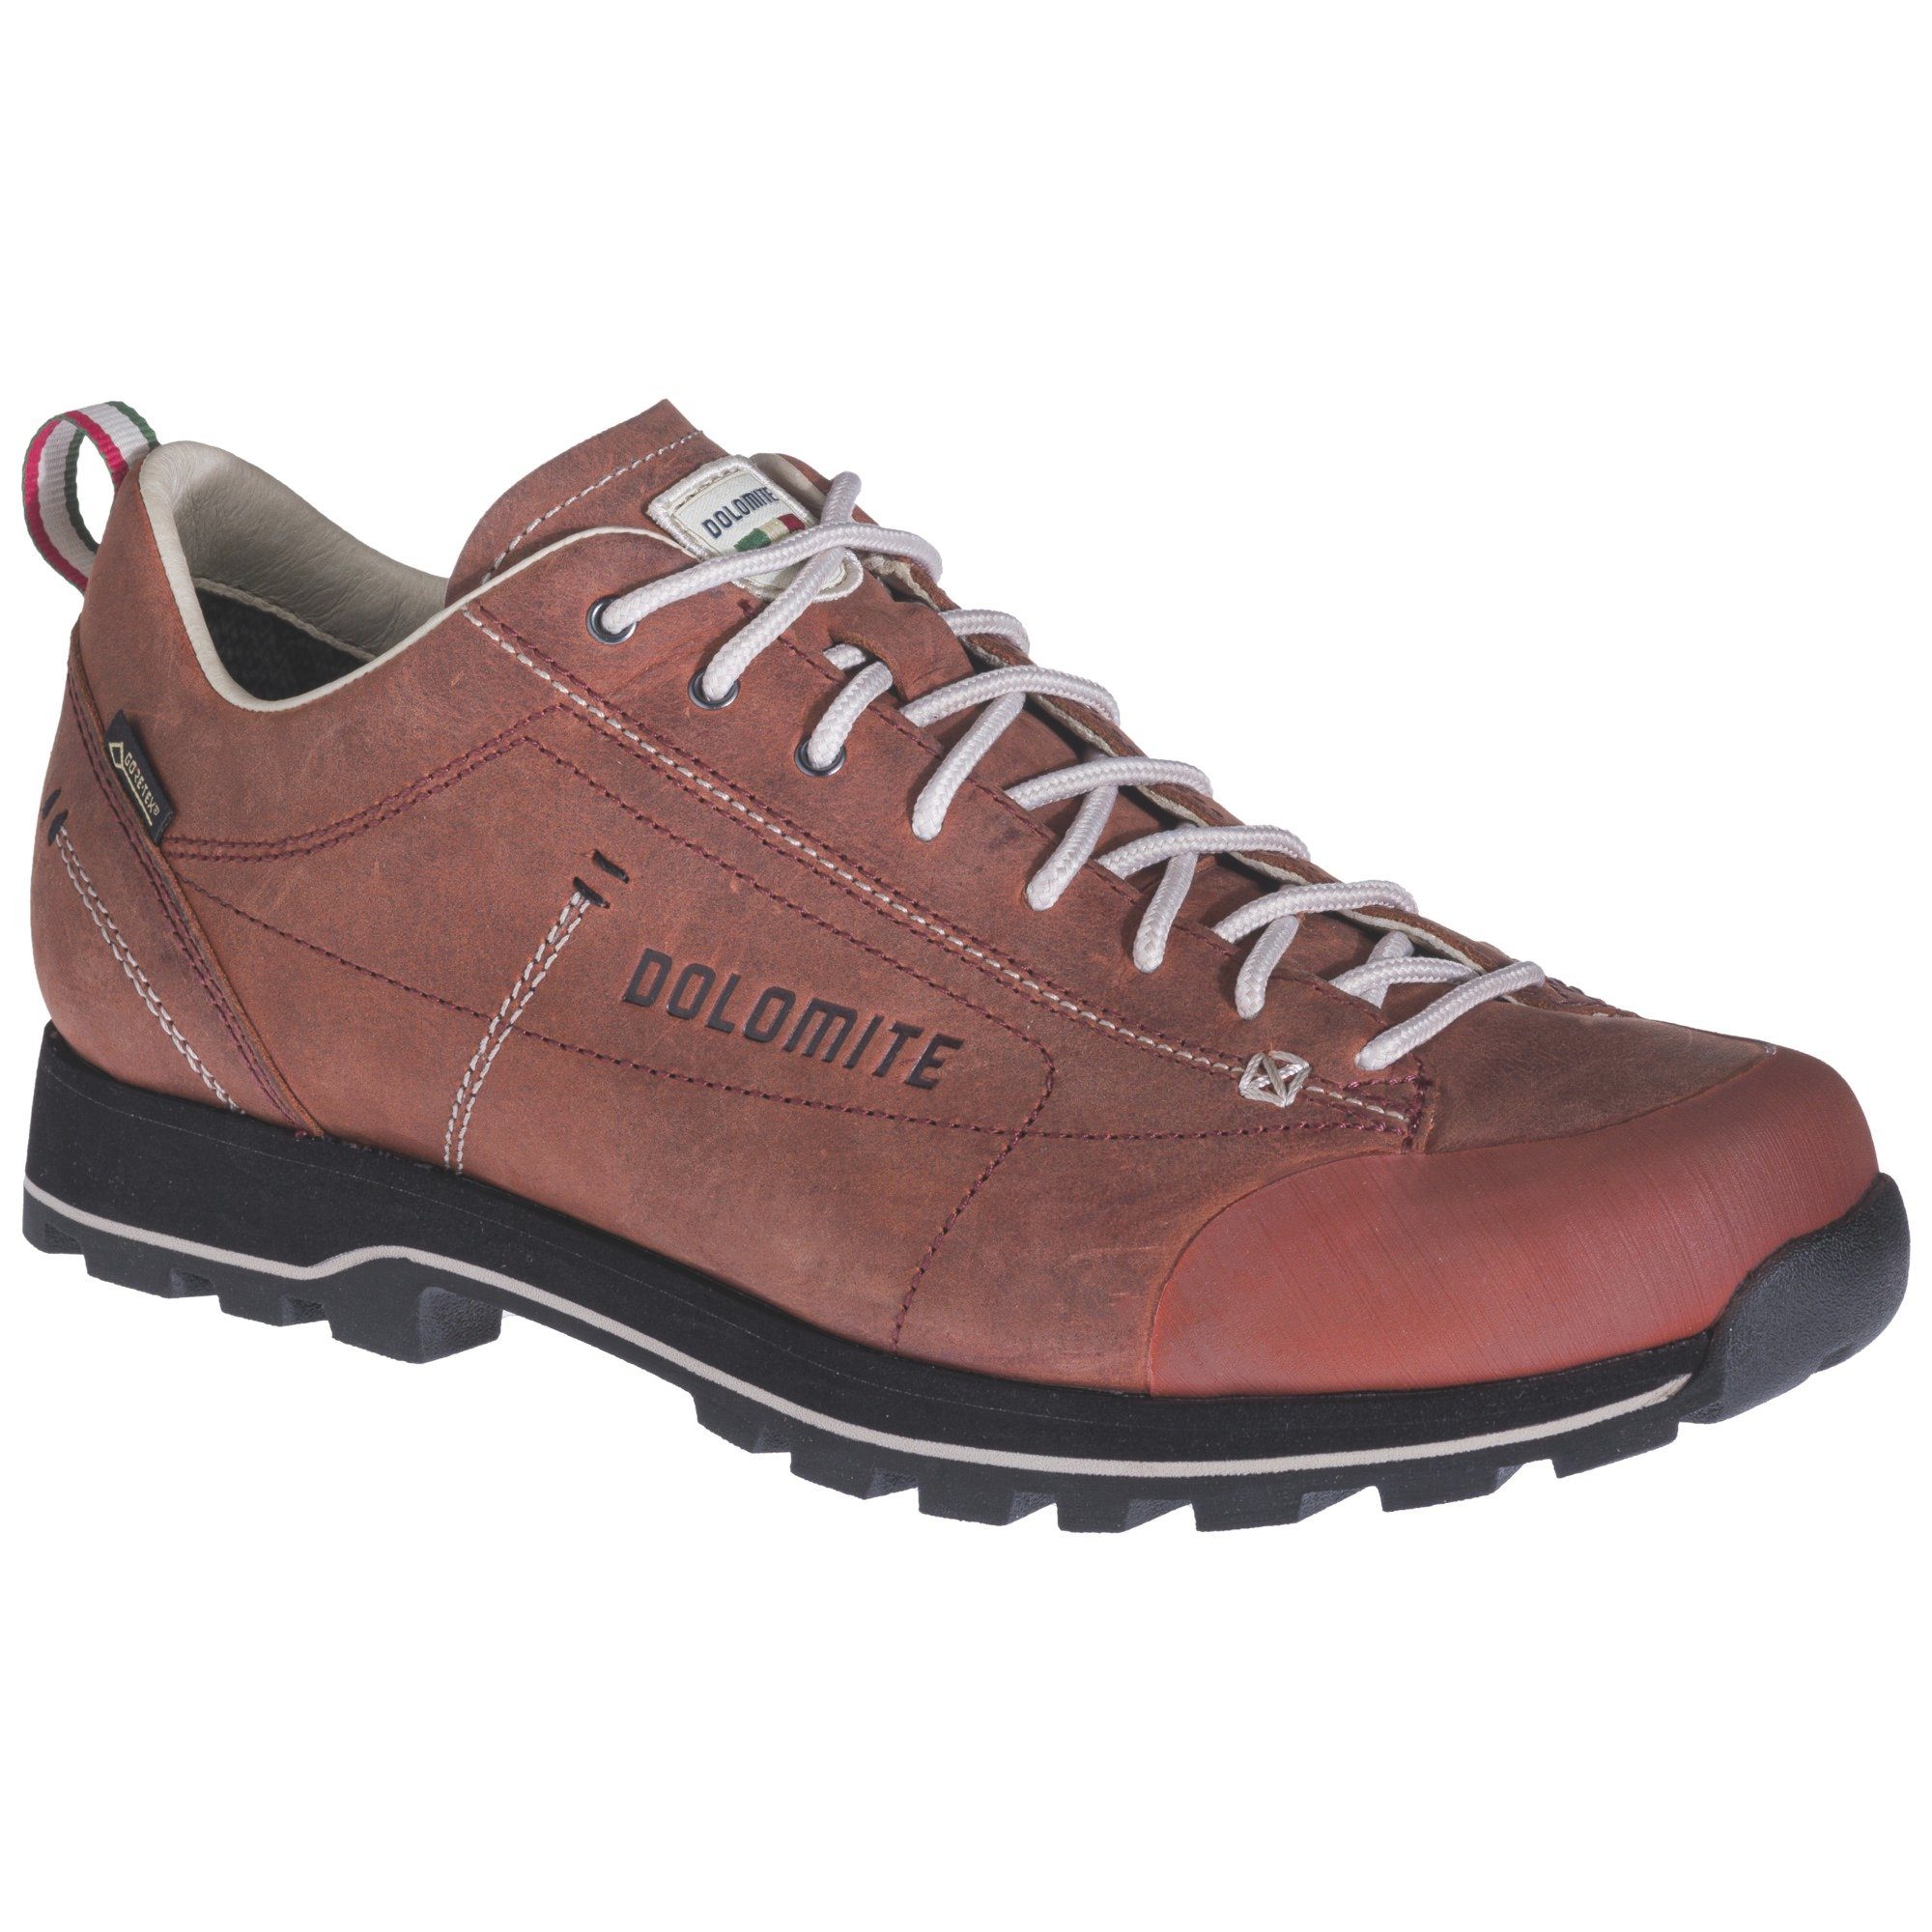 Dolomite Dolomite DOL Shoe Cinquantaquattro Low Fg Gt Outdoorschuh Ginger Red